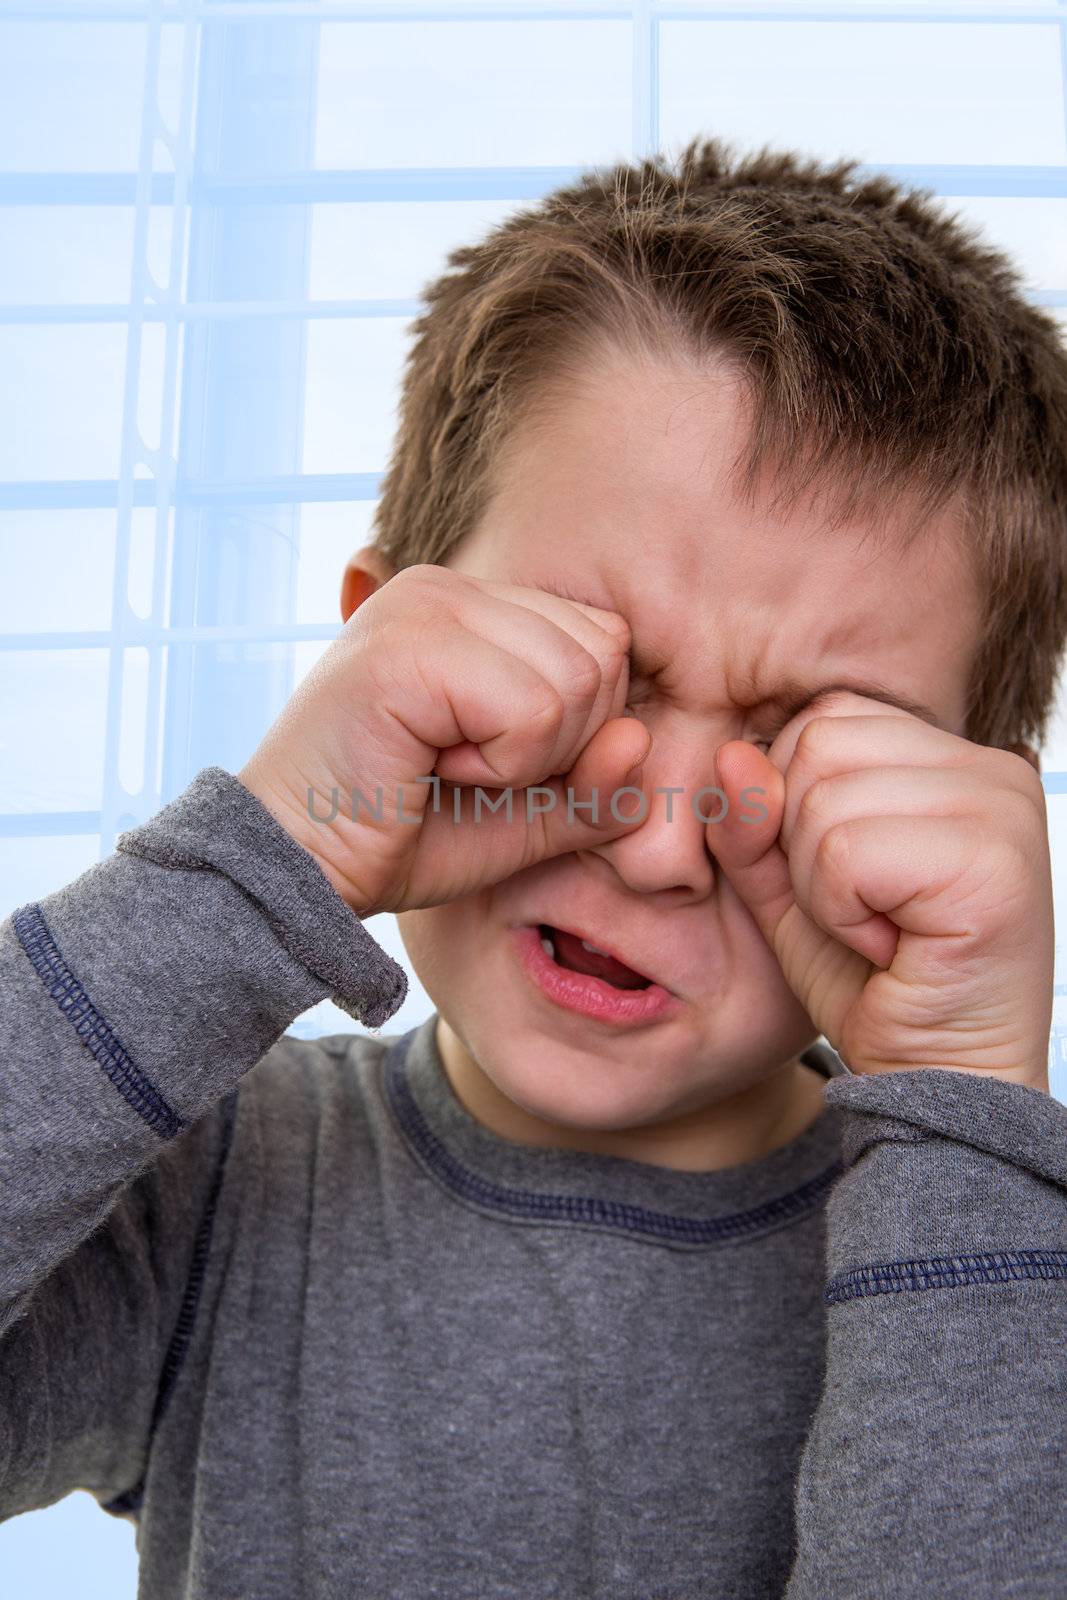 Eight years old kid crying while his hands are on his face touching his eyes, something very sad for him